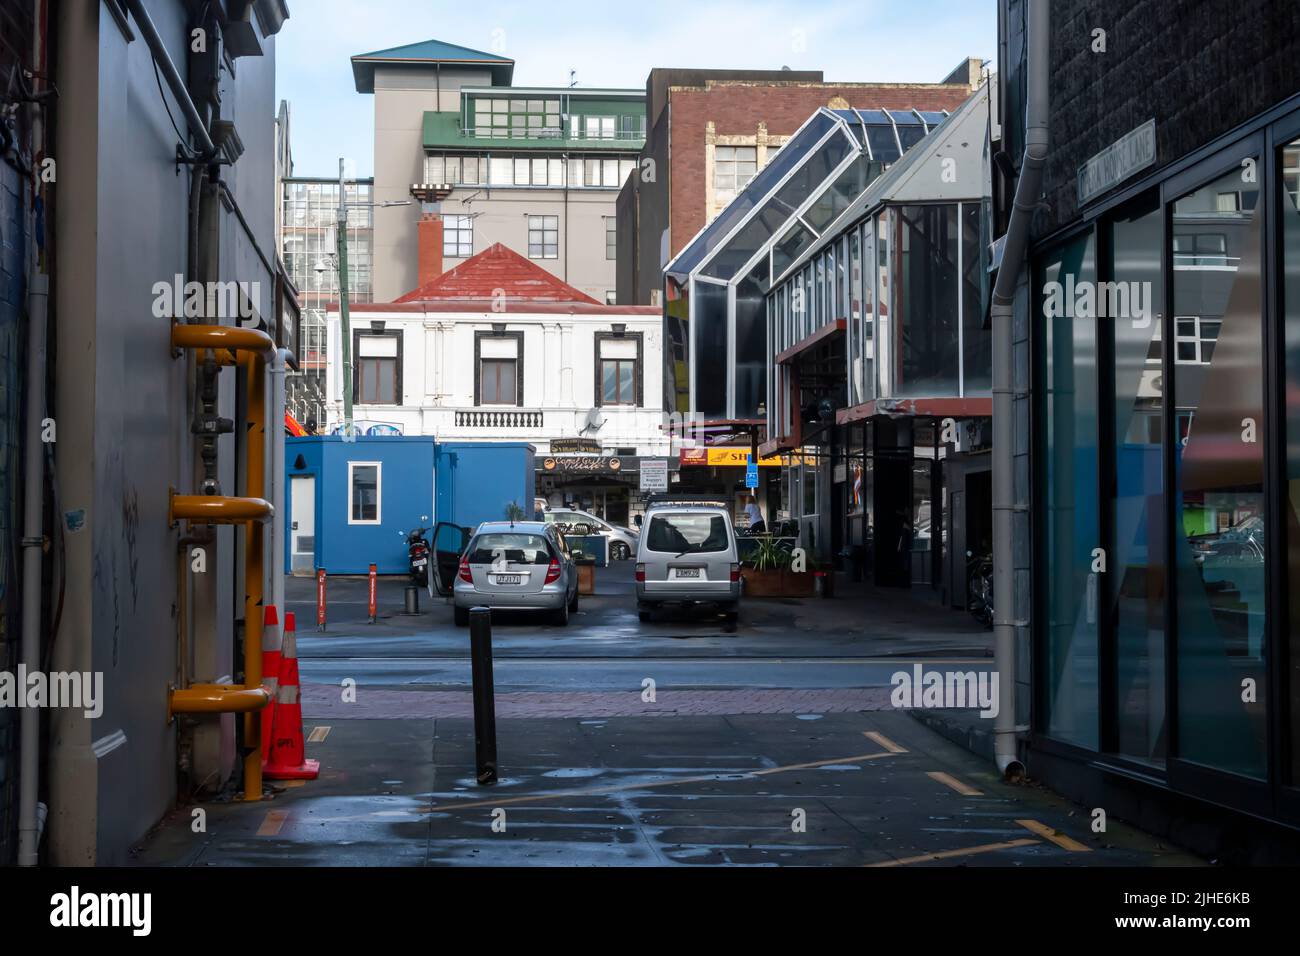 Buildings and alley way in central Wellington, North Island, New Zealand Stock Photo